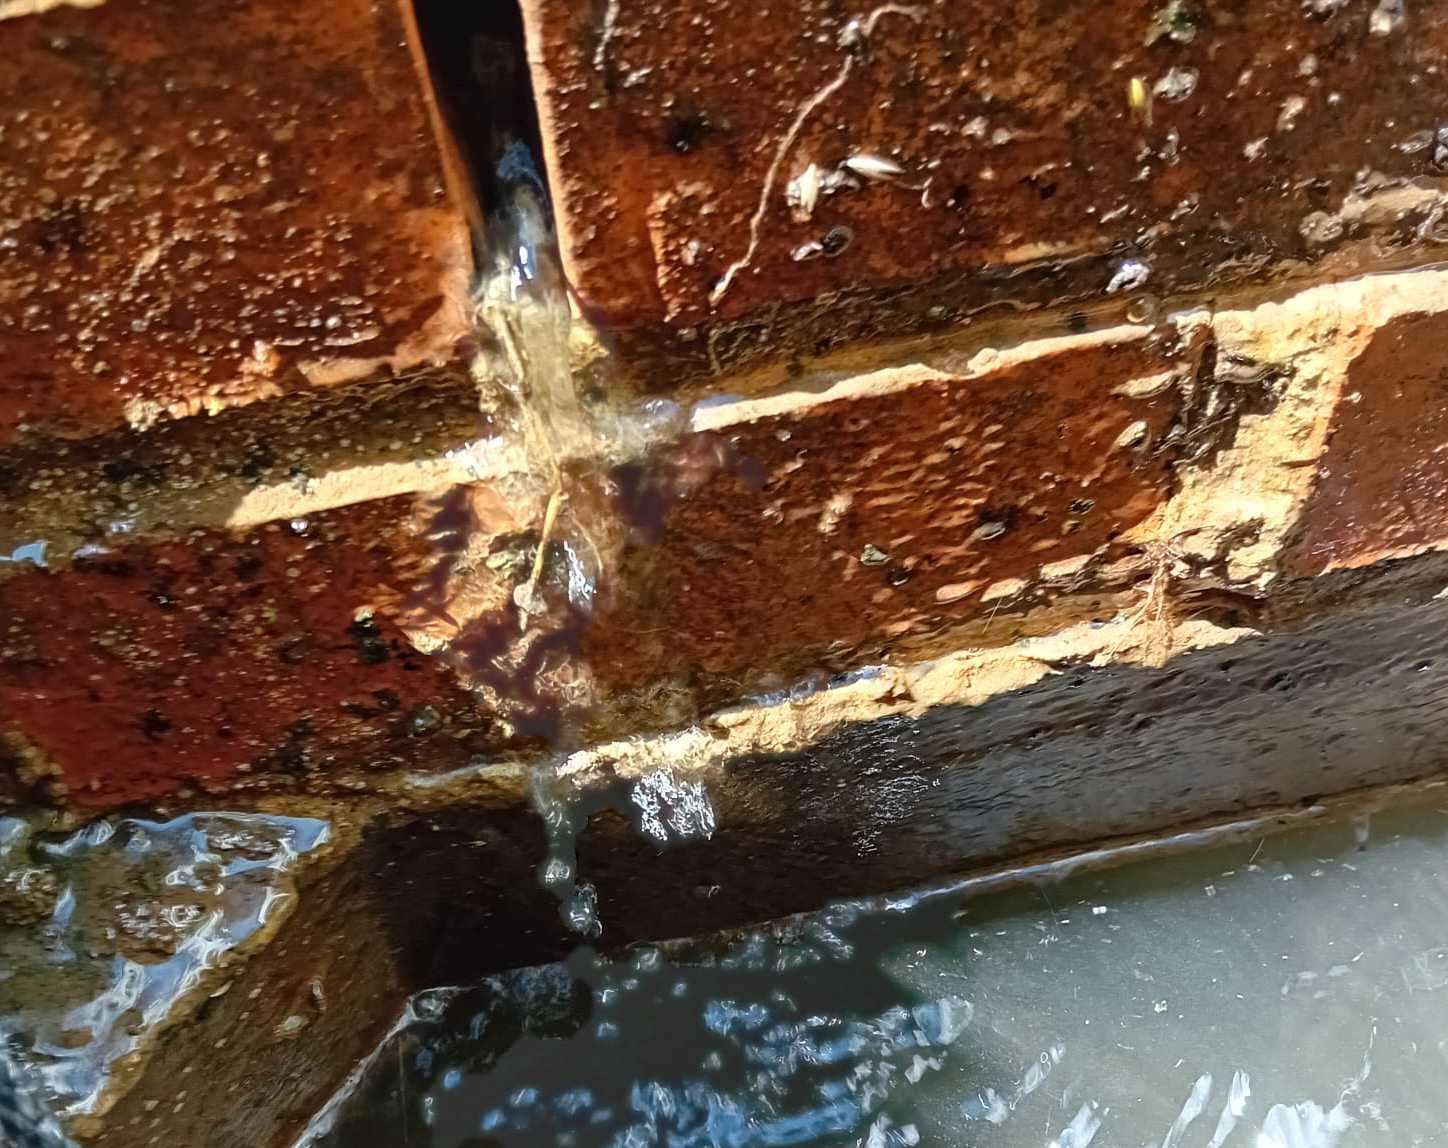 Water also comes through a crack in the brickwork in the drainage system. Picture: Vikki Storey